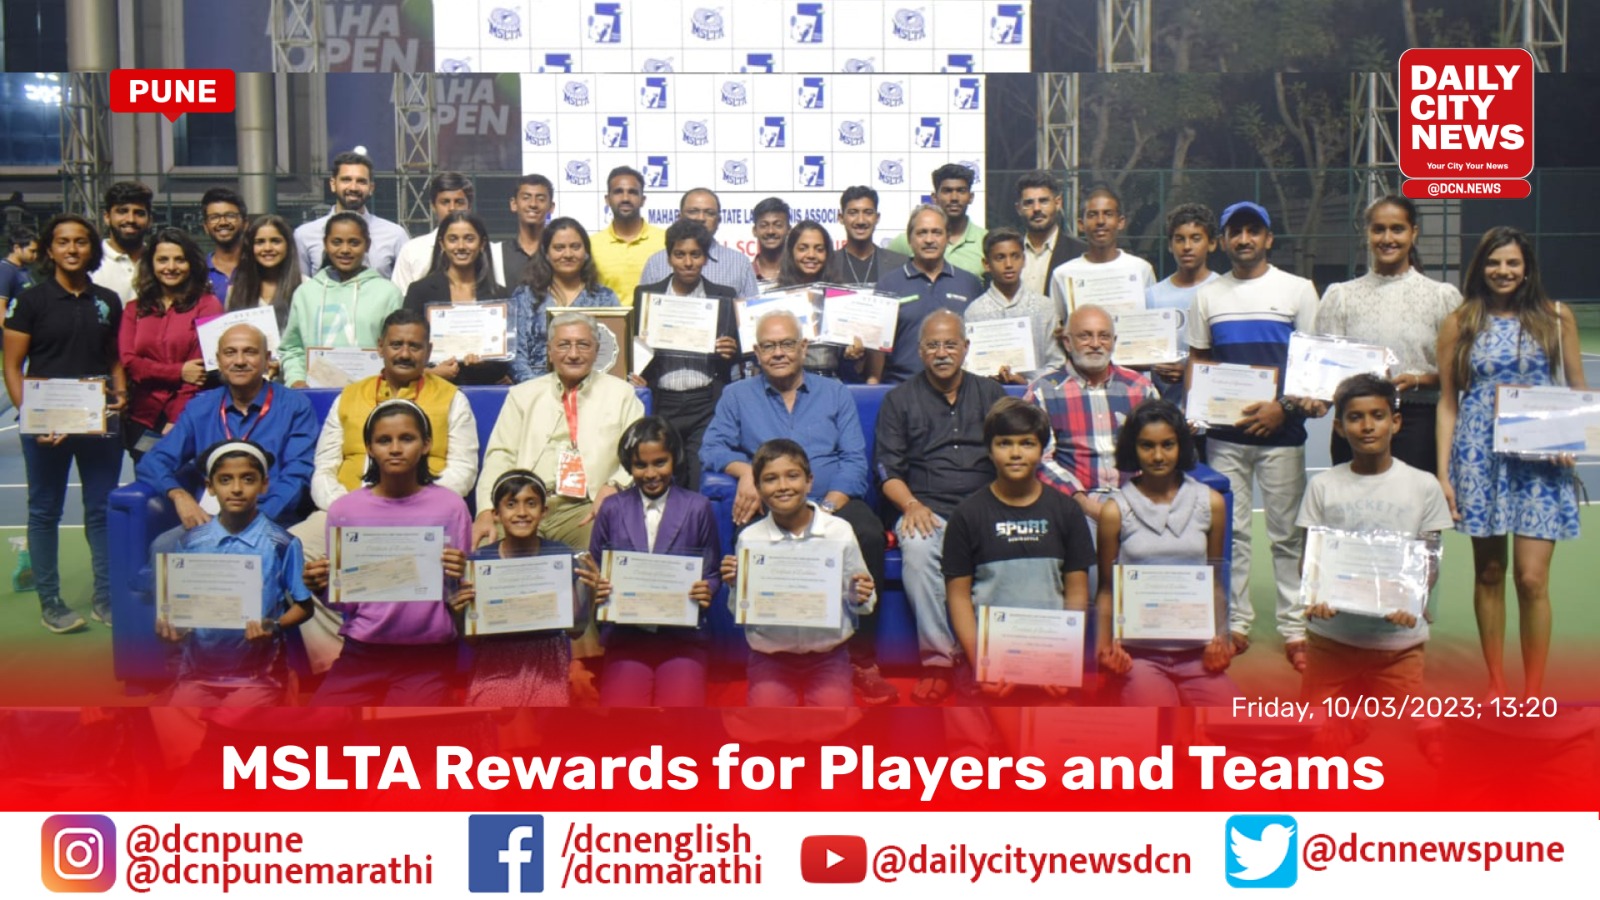 MSLTA Rewards for Players and Teams 